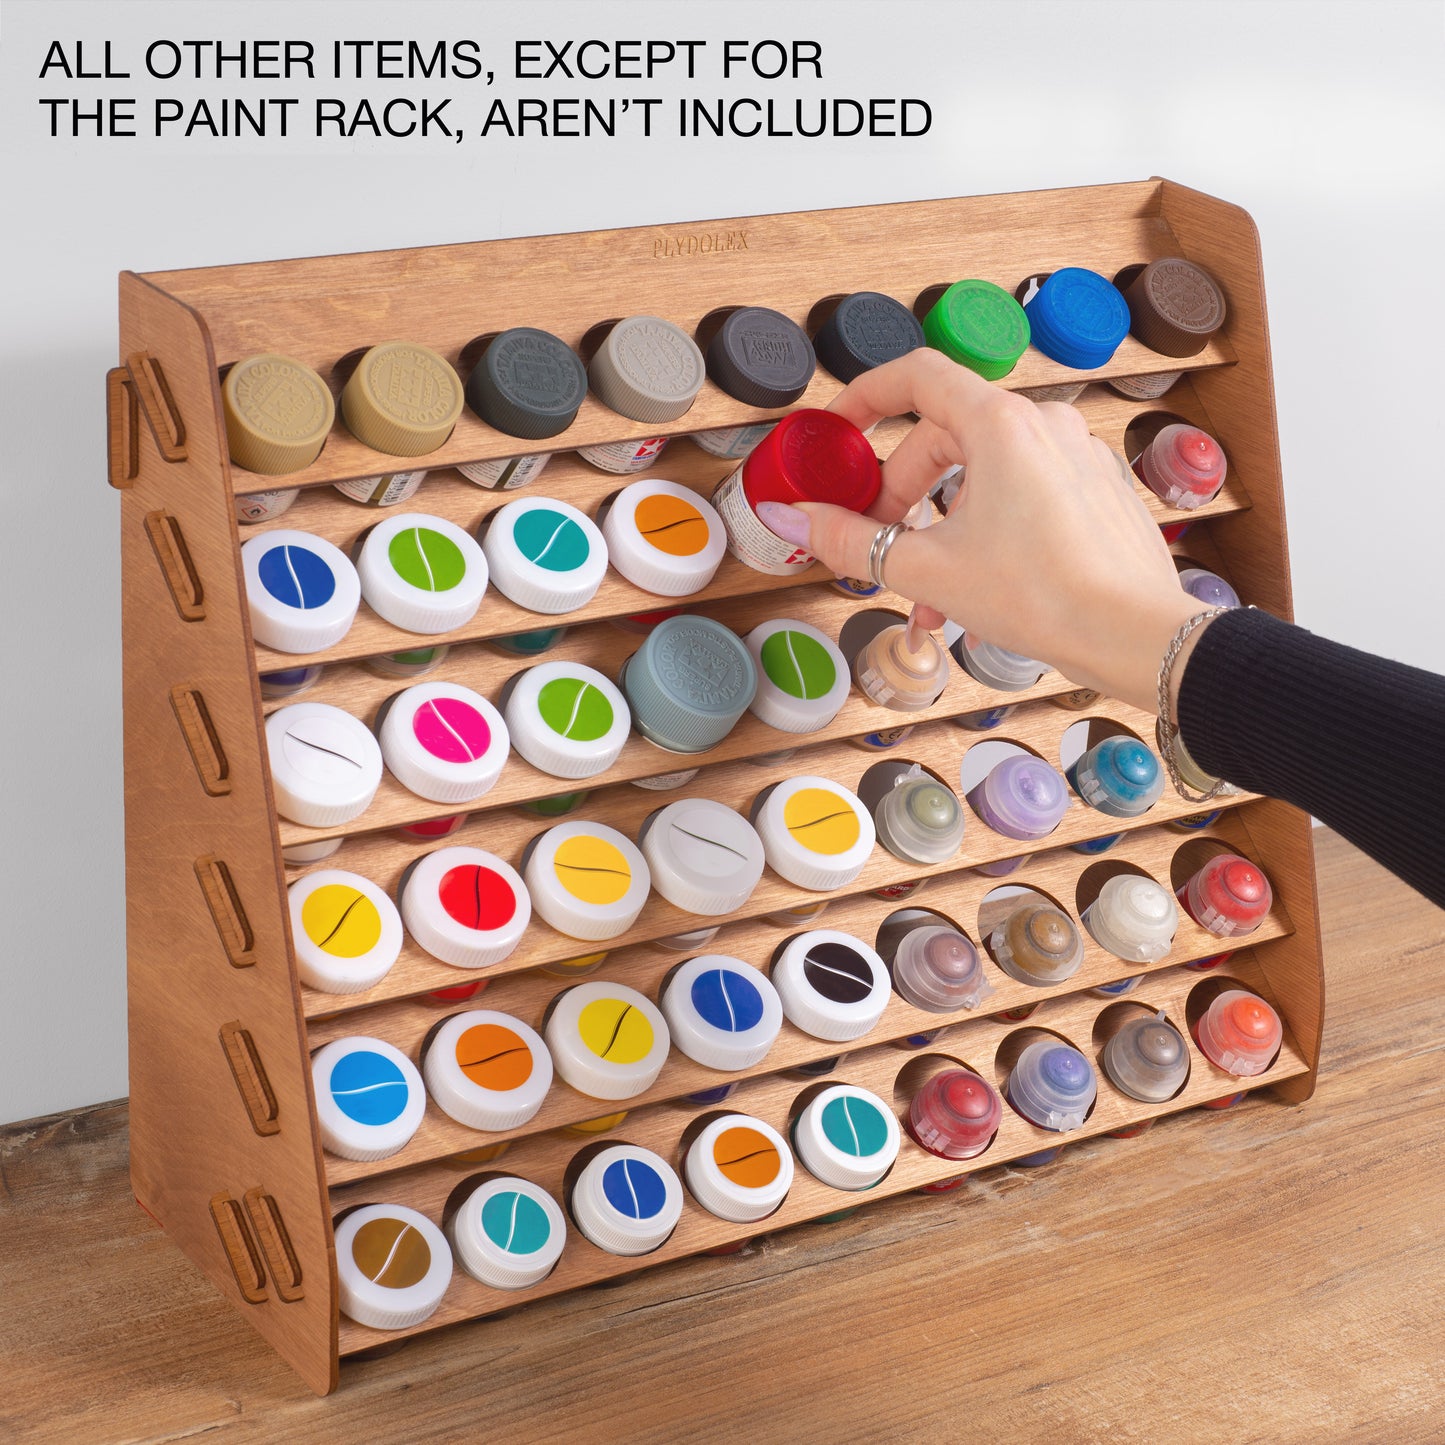 Plydolex Tamiya Paint Rack Organizer with 54 Holes for Miniature Paint Set - Wall-mounted Wooden Craft Paint Storage Rack - Craft Paint Holder Rack 16x5.2x12.6 inch